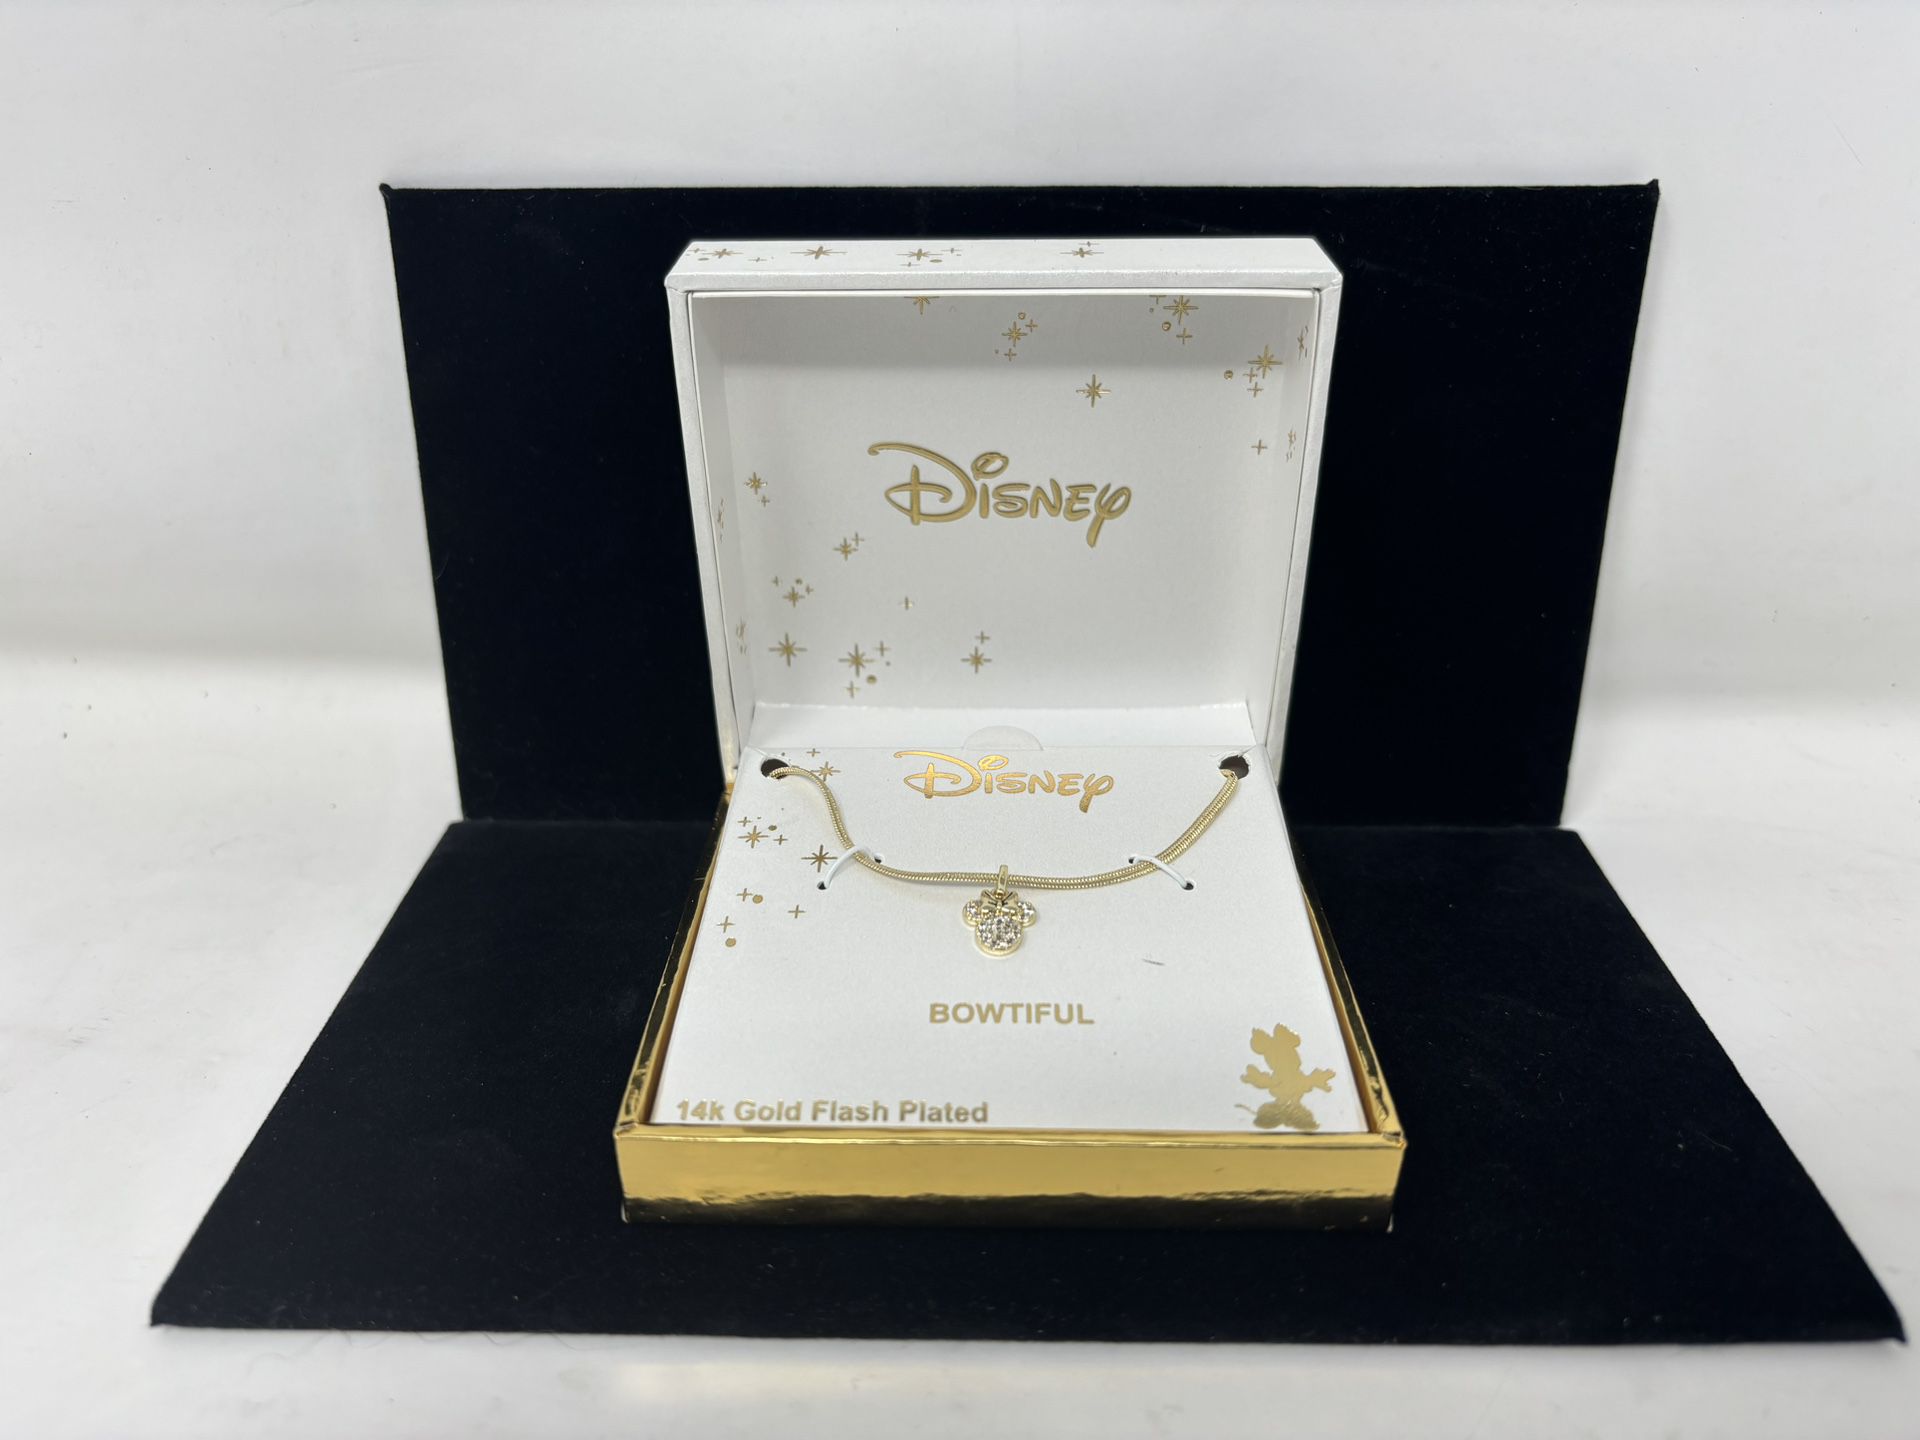 Disney 14K Gold Flash Plated Necklace